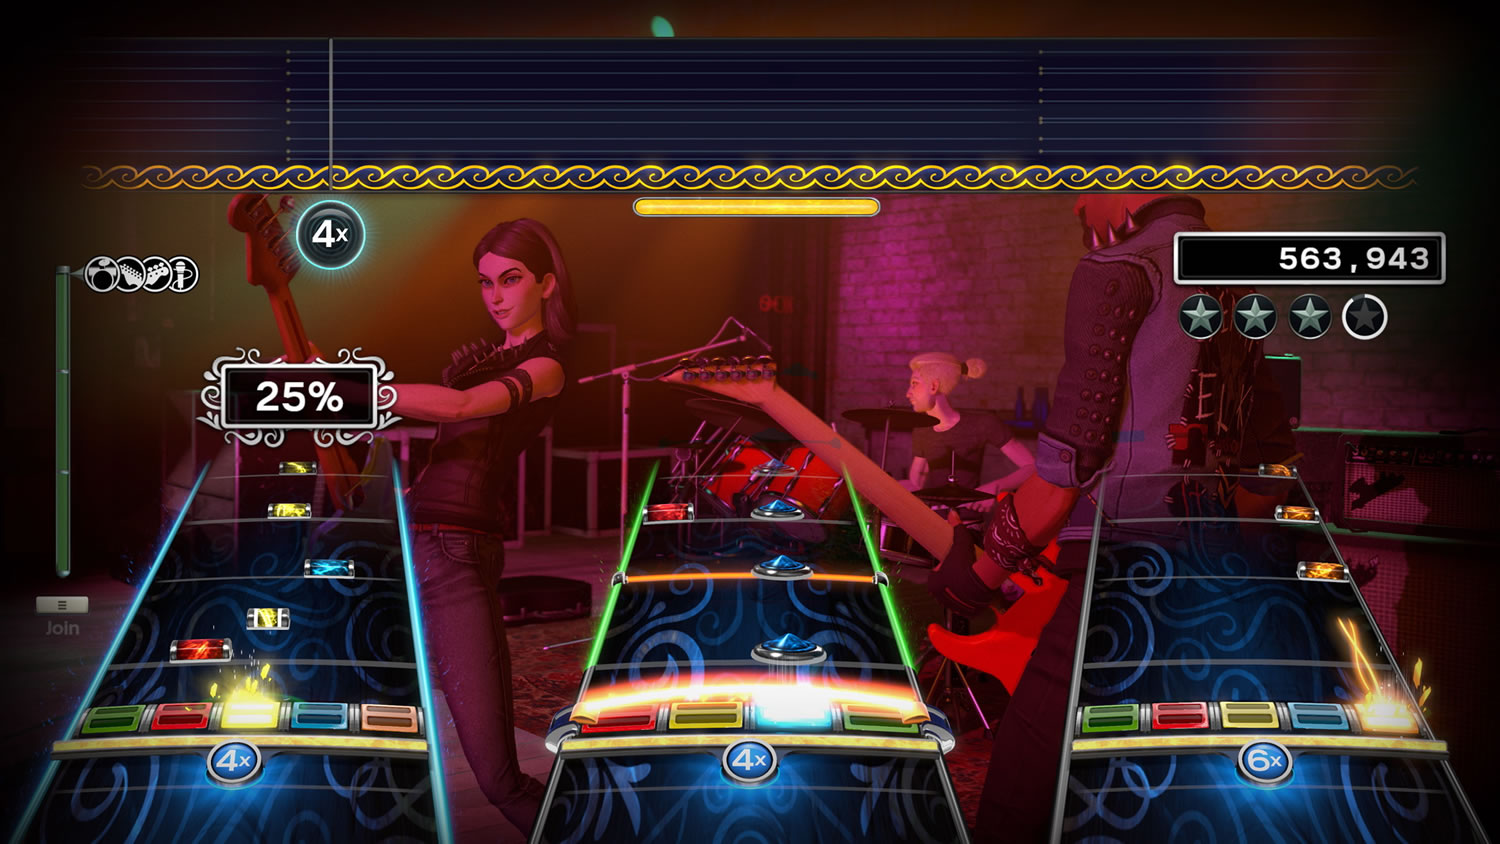 &quot;Rock Band 4&quot; can be played on the PlayStation 4 and Xbox One gaming systems.